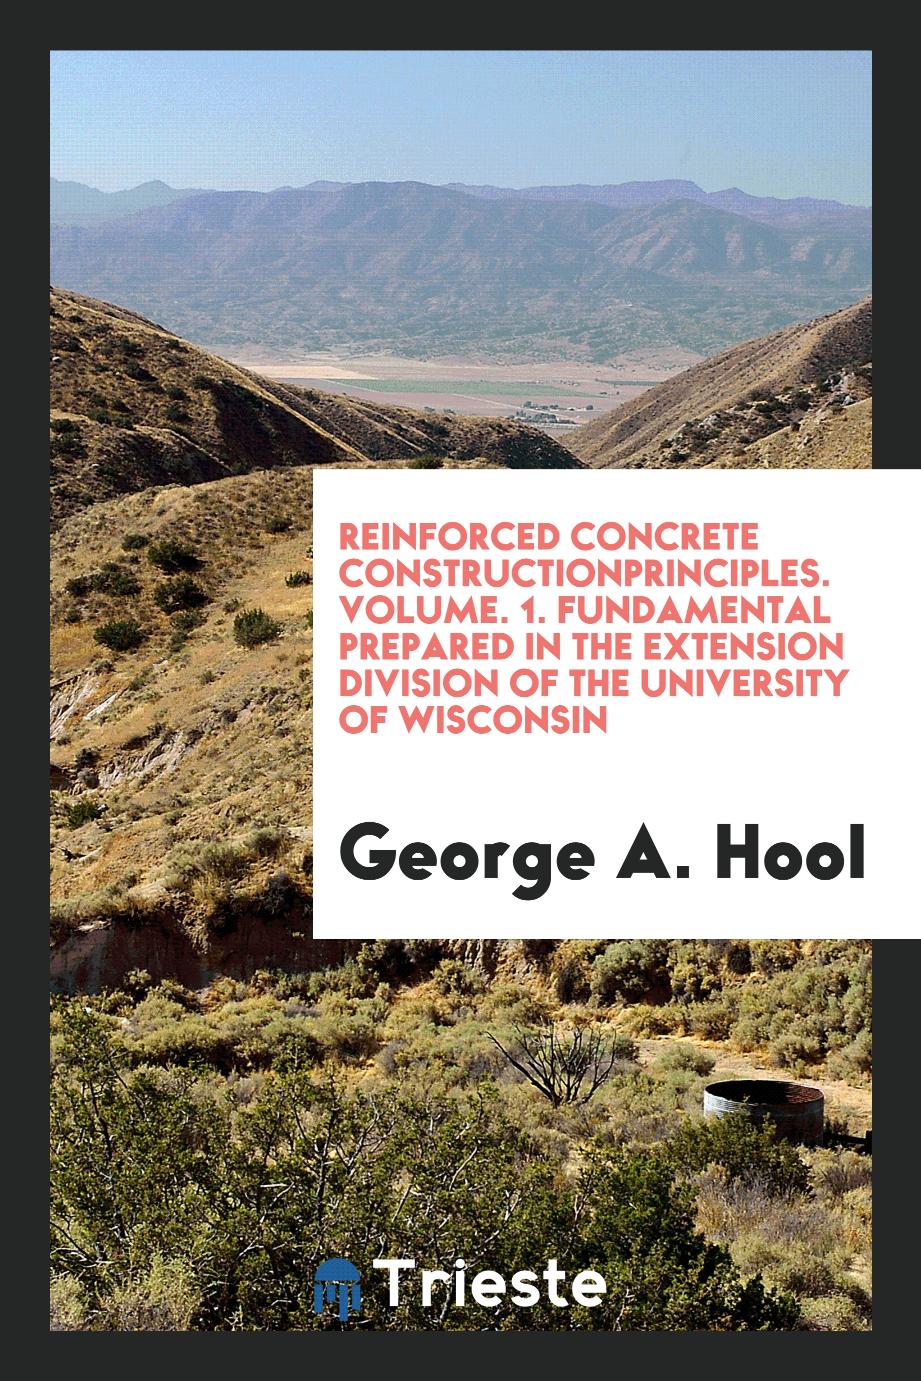 Reinforced concrete constructionprinciples. Volume. 1. Fundamental Prepared in the Extension Division of the University of Wisconsin